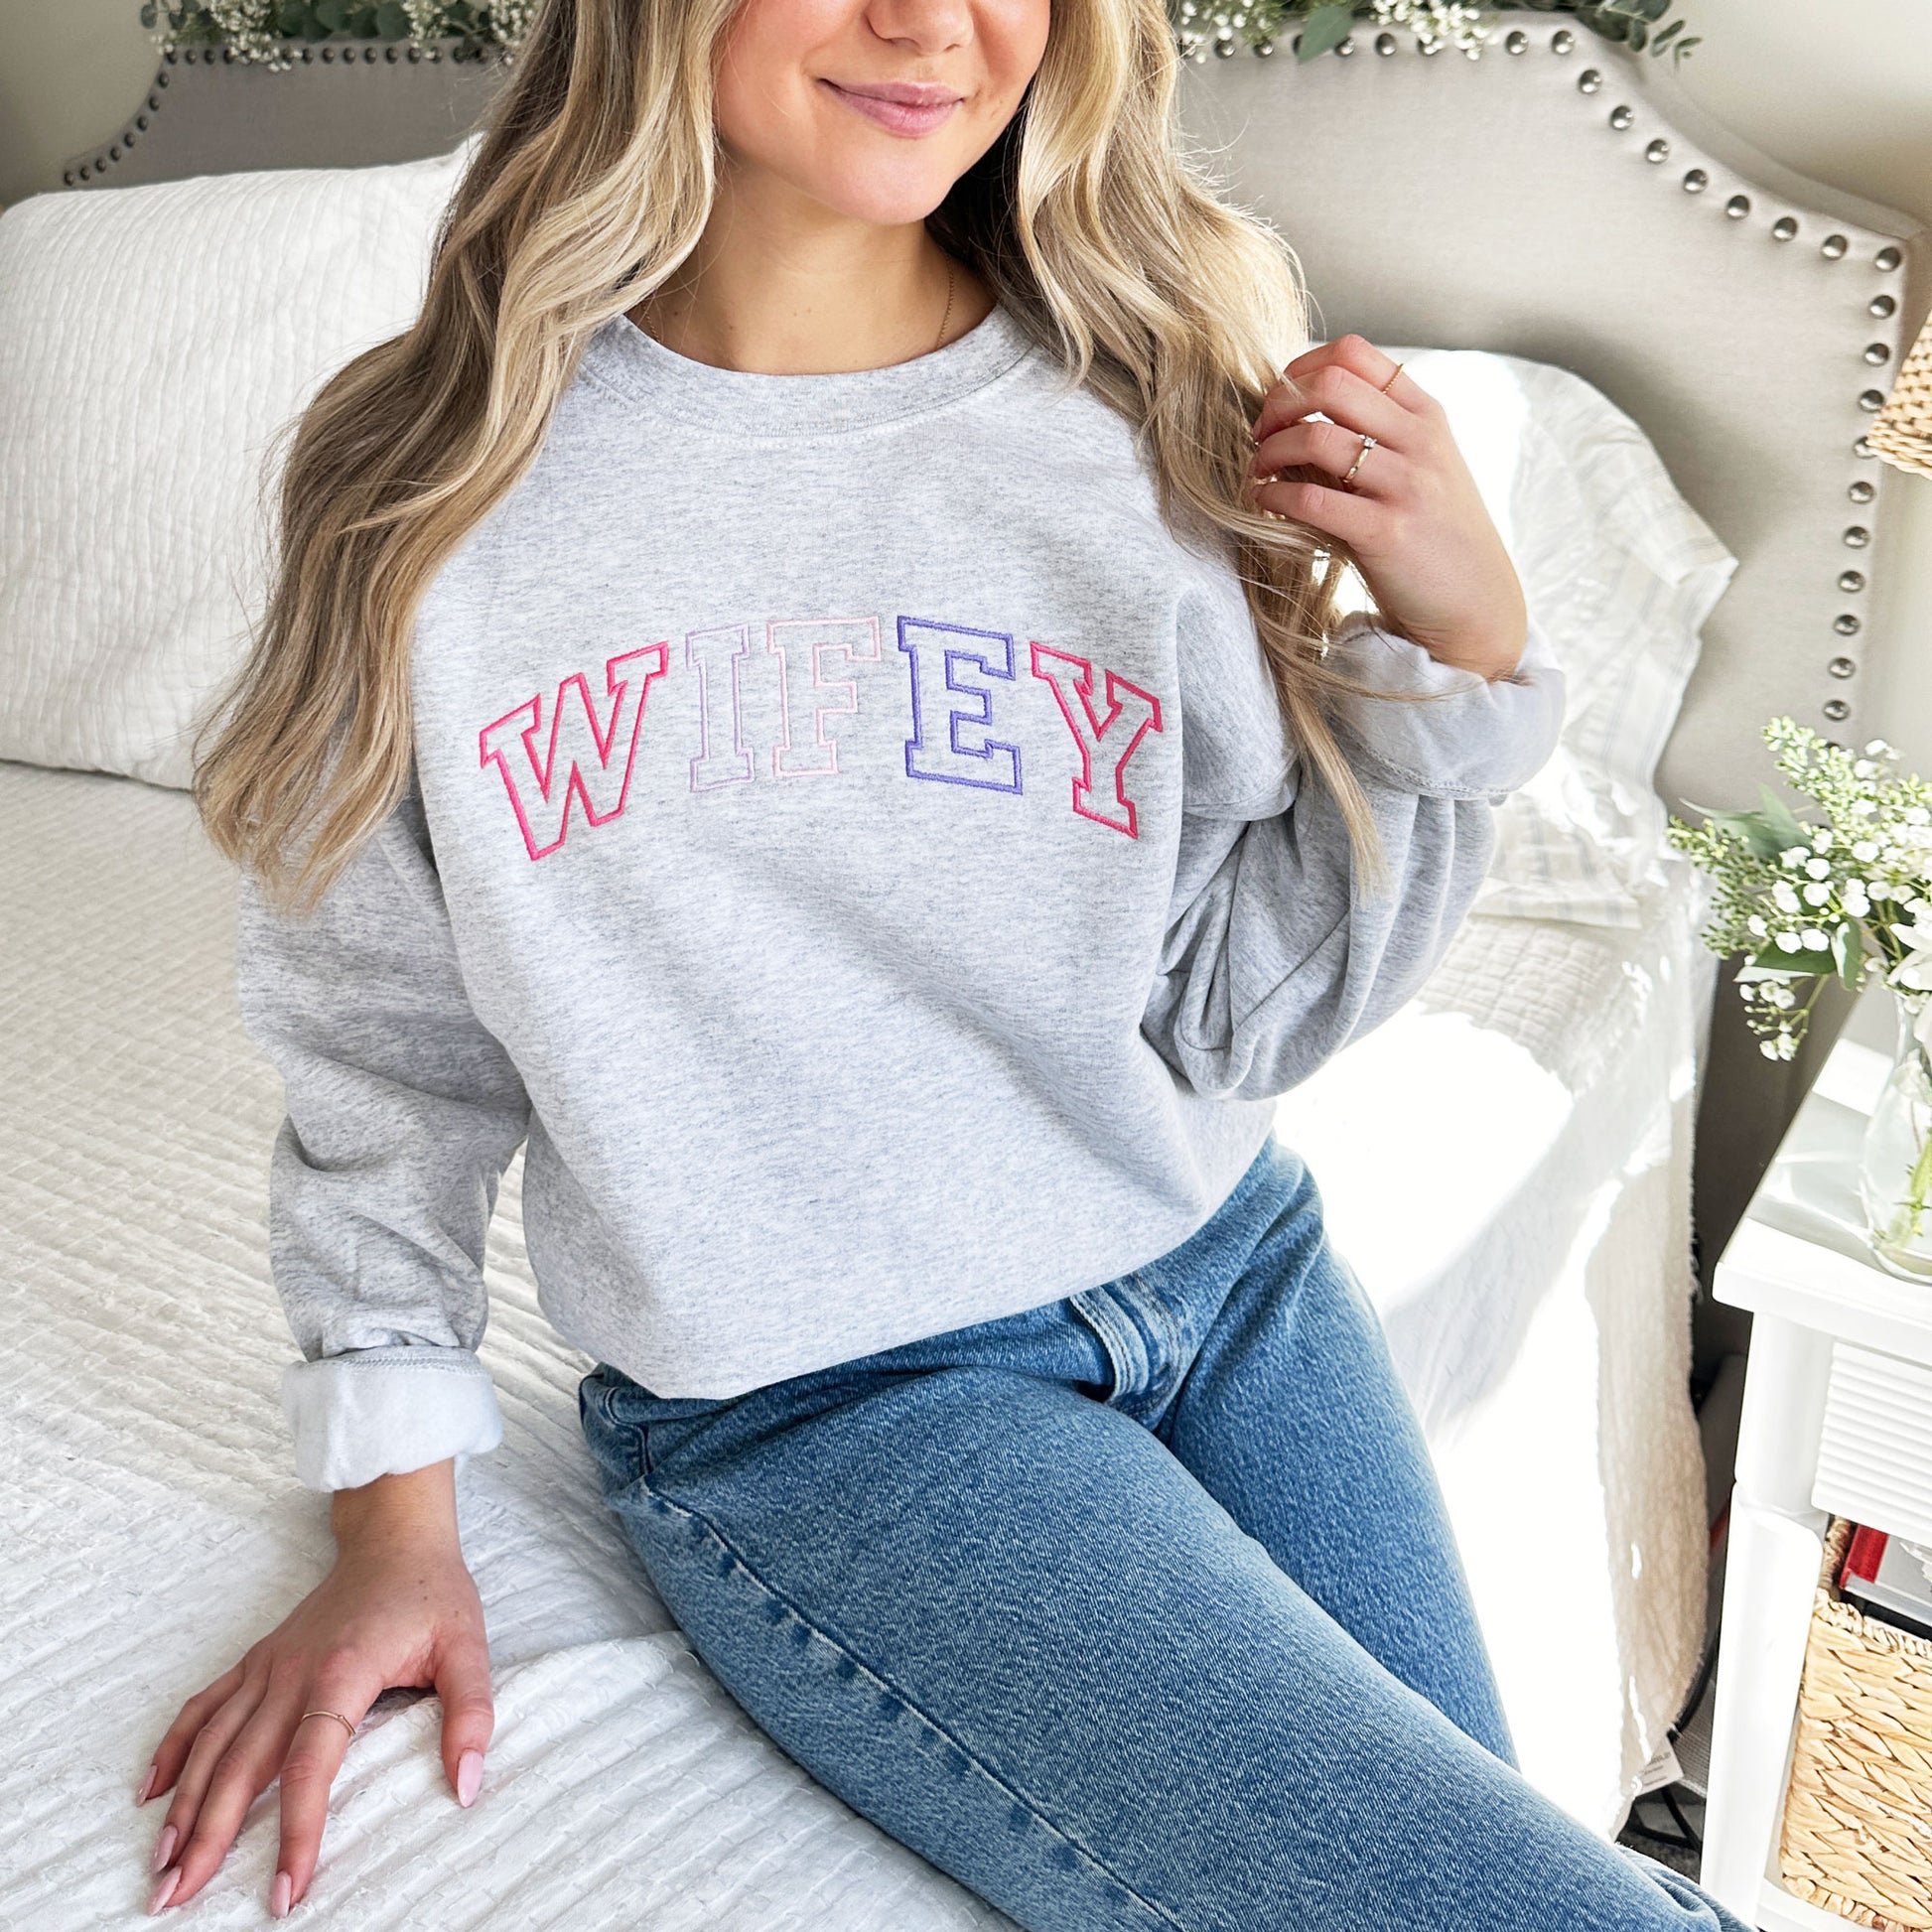 woman sitting on the edge of the bed getting ready for her wedding wearing an ash gray sweatshirt with wifey embroidered in a large athletic block font across the chest